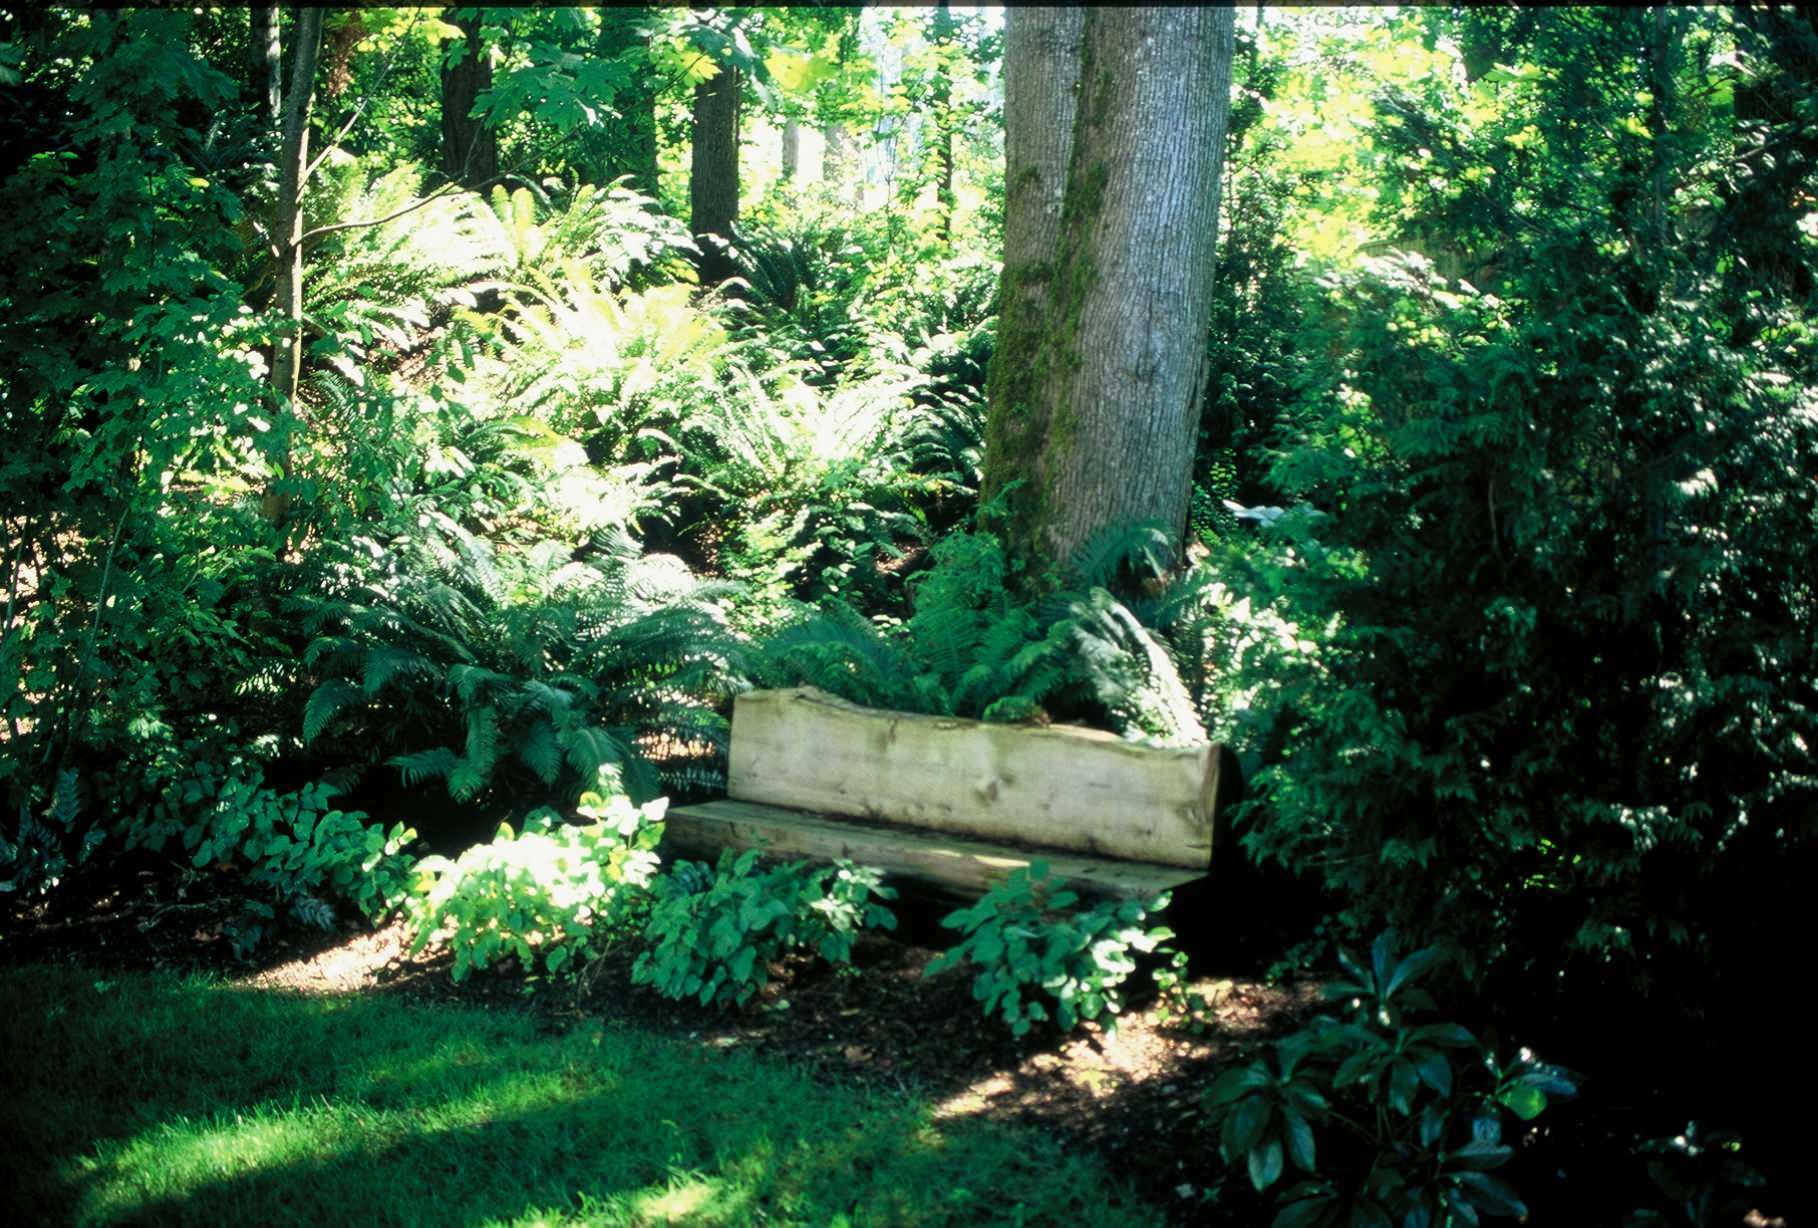 Rustic bench seat with NW native plantings